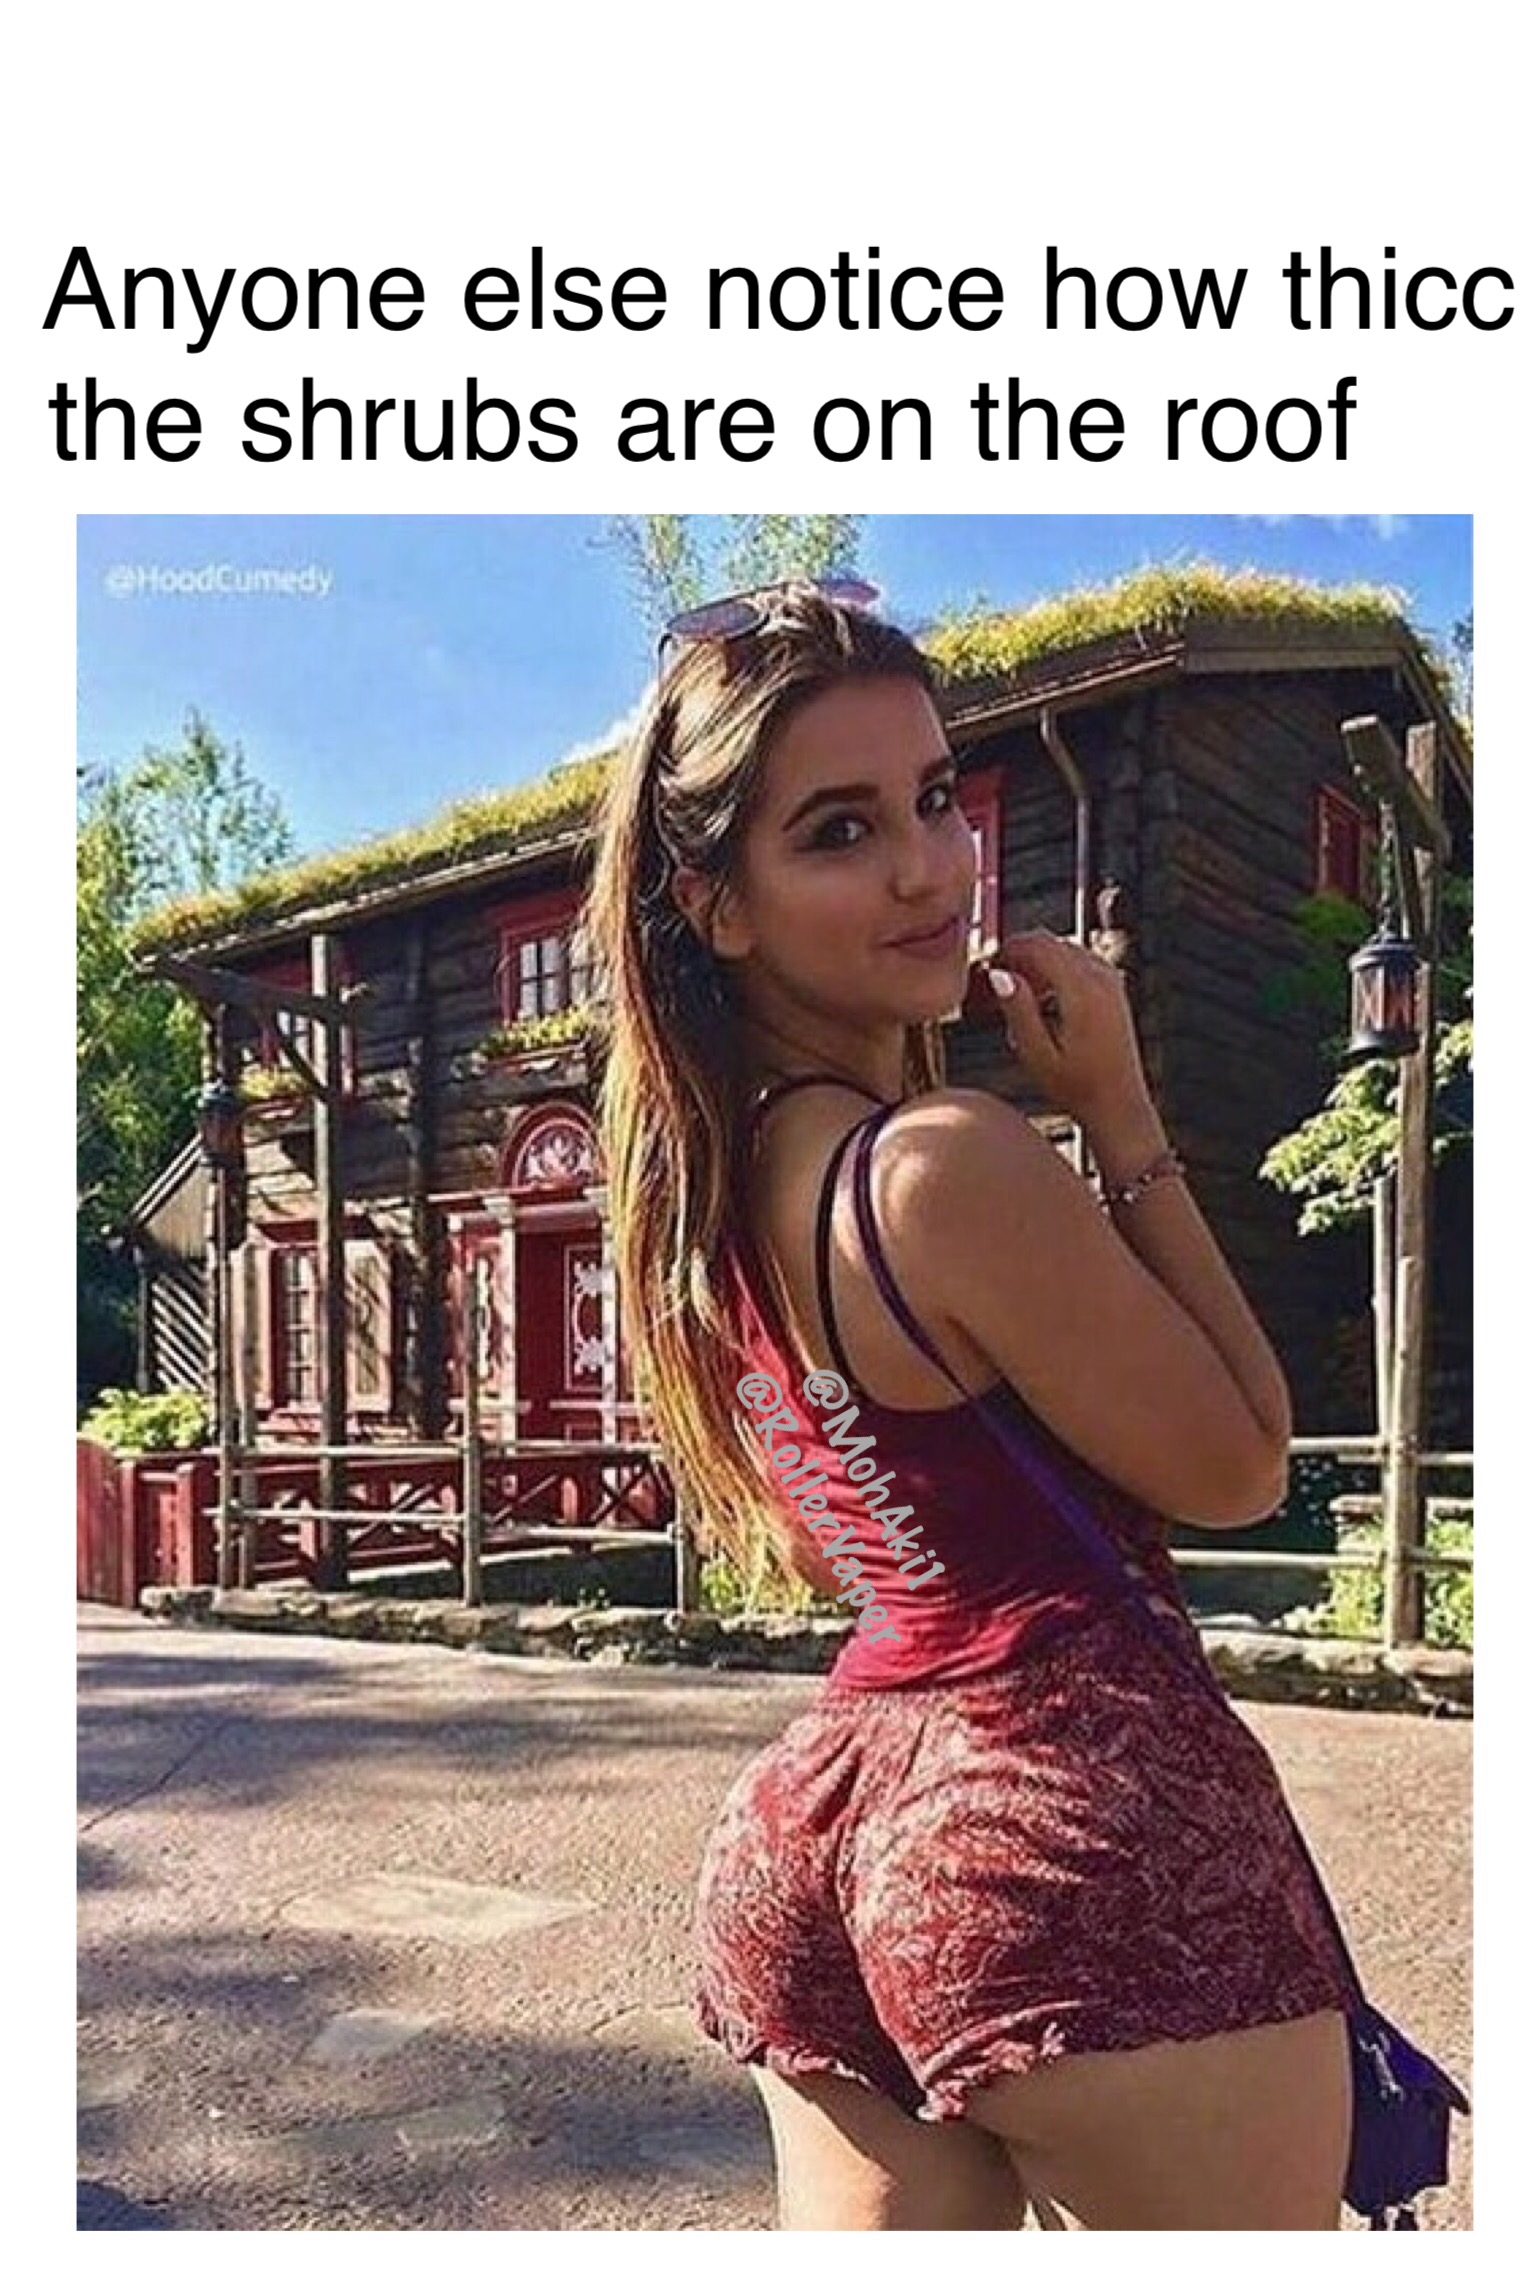 photo caption - Anyone else notice how thicc the shrubs are on the roof wy